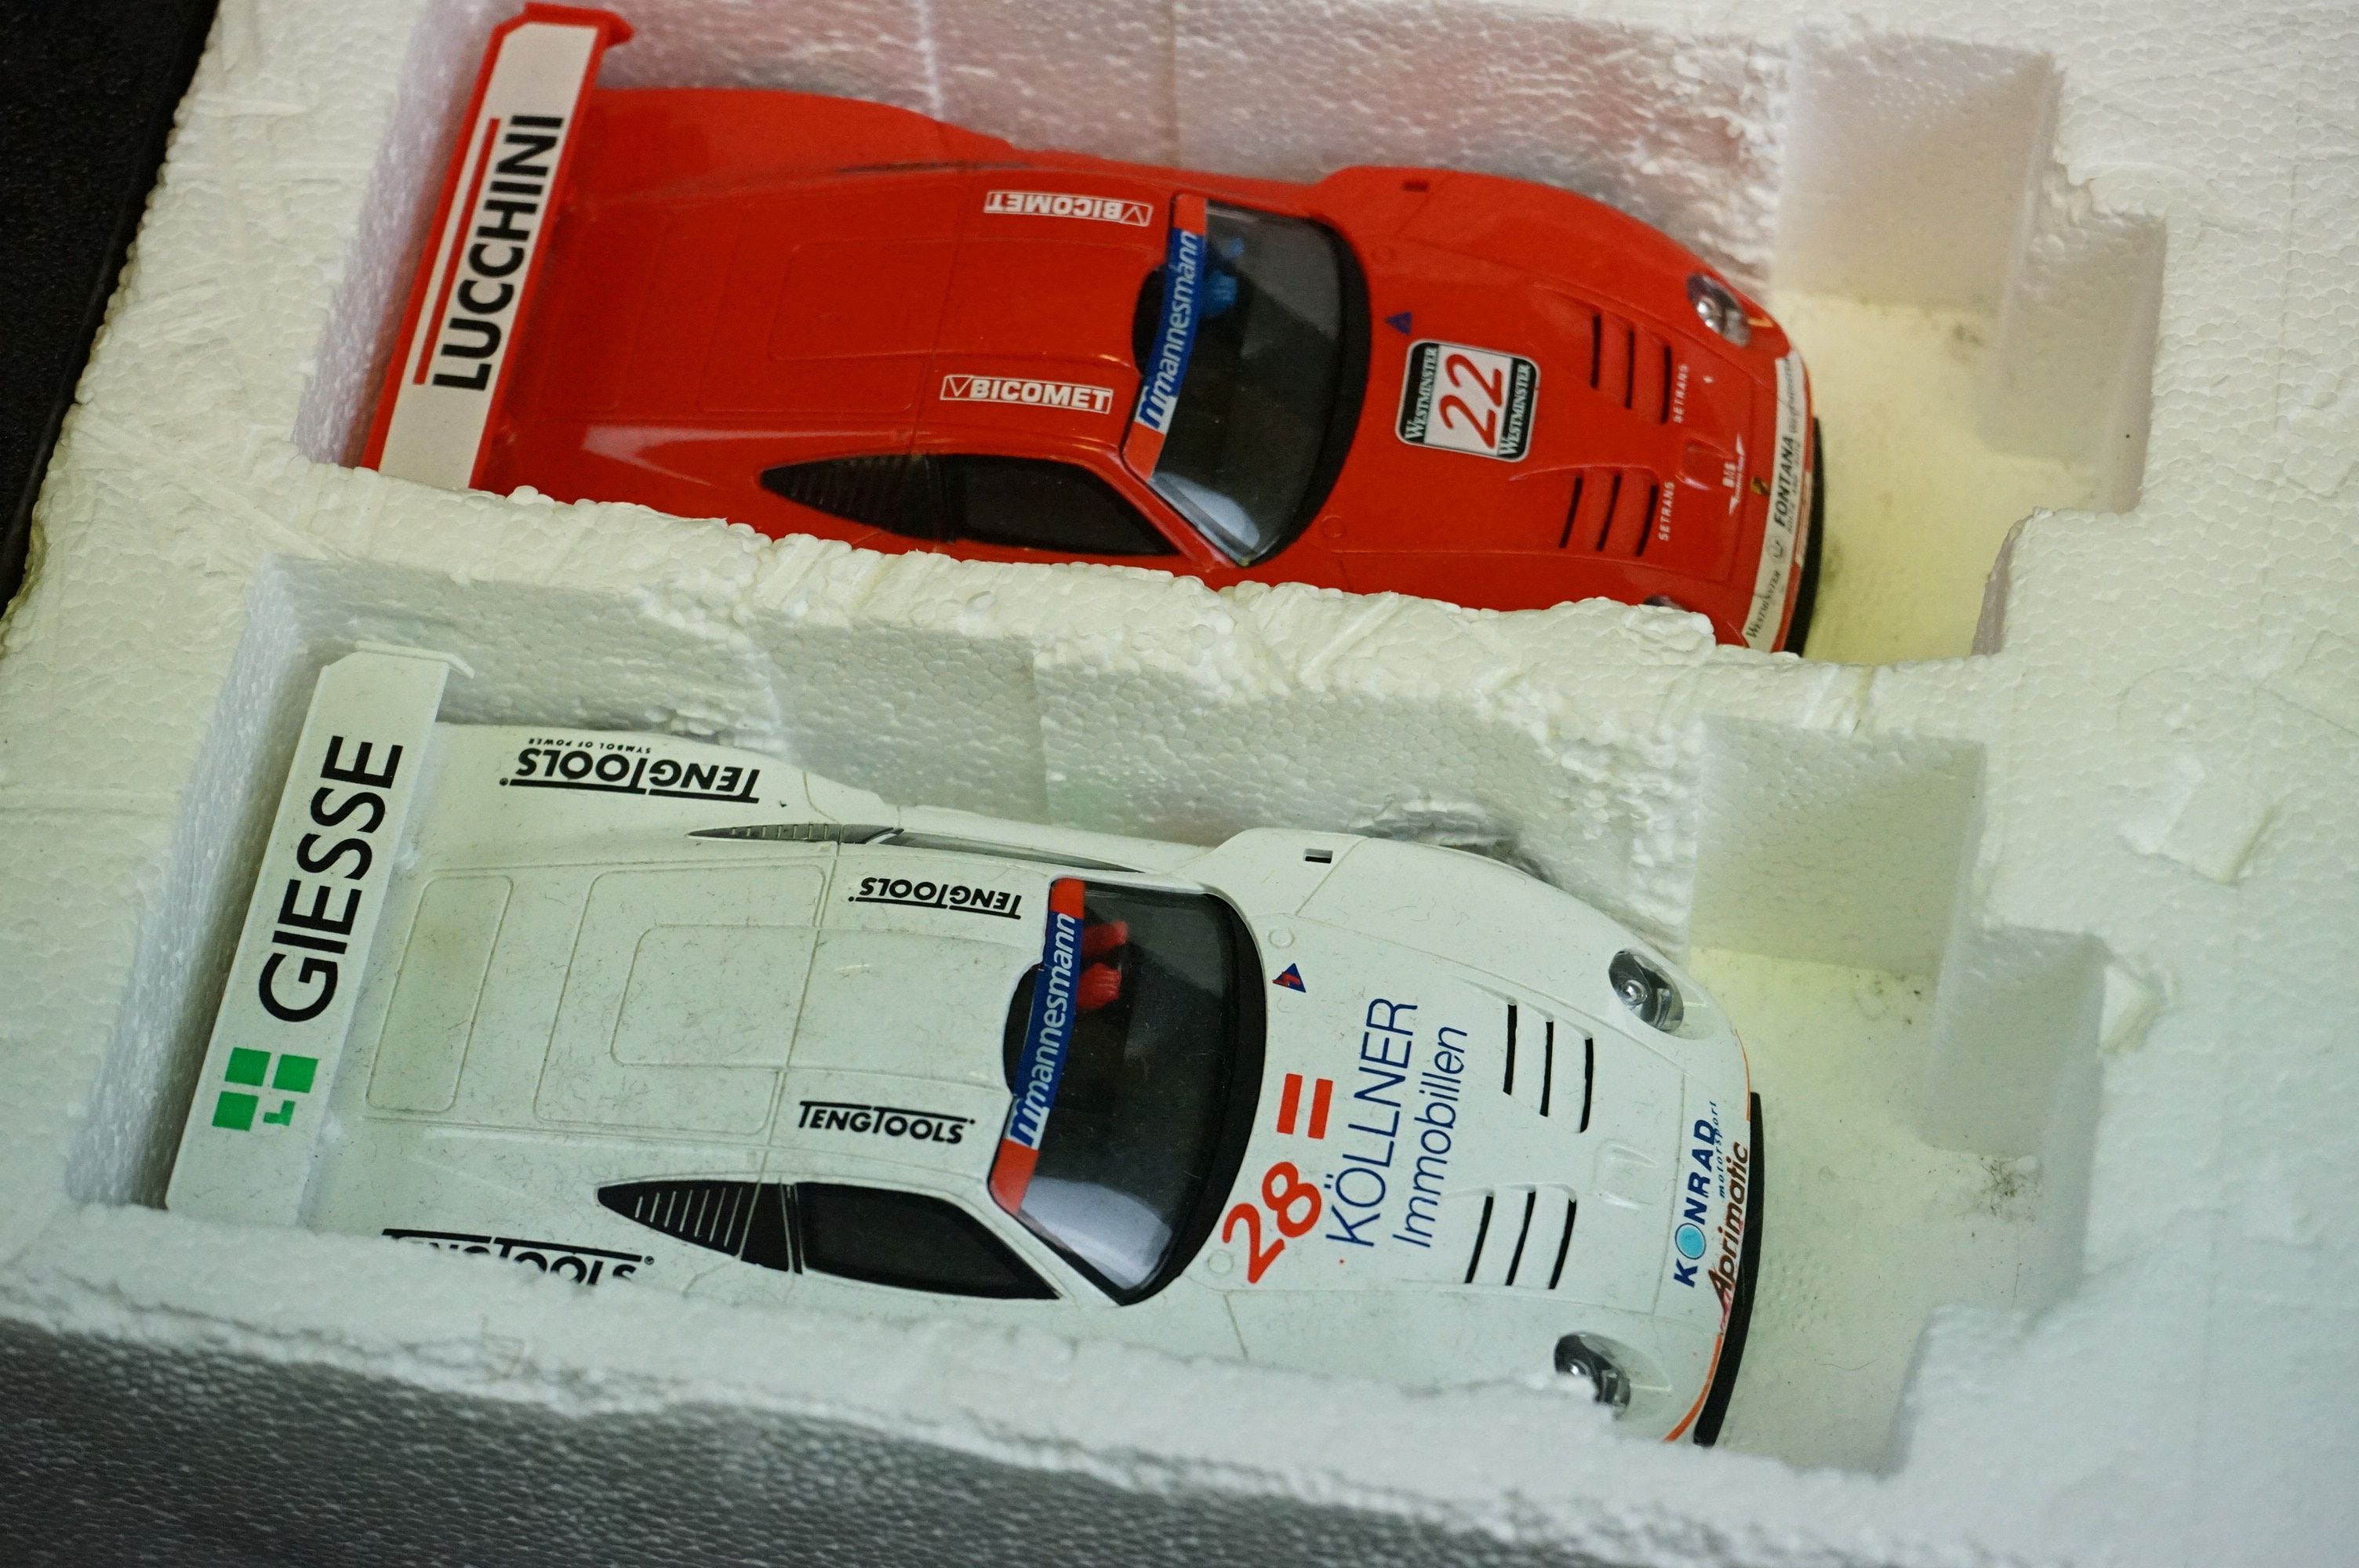 Boxed Scalextric C1023 Le Mans 24hr set, together with a boxed Ideal TCR Total Control Racing 1665-9 - Image 8 of 8